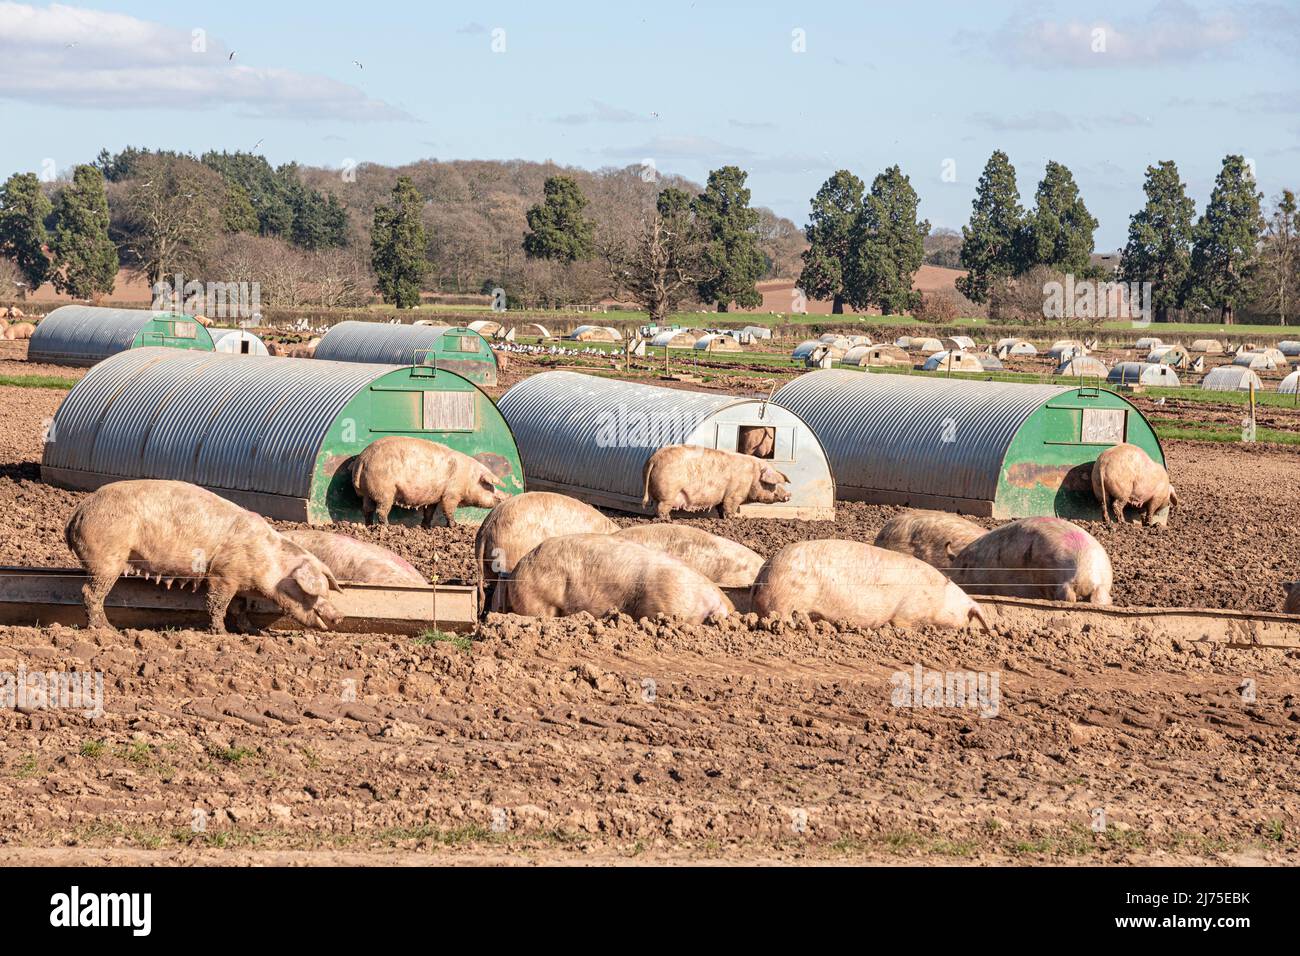 High density outdoor pig farming at Brooms Green on the Gloucestershire - Herefordshire border, England UK Stock Photo